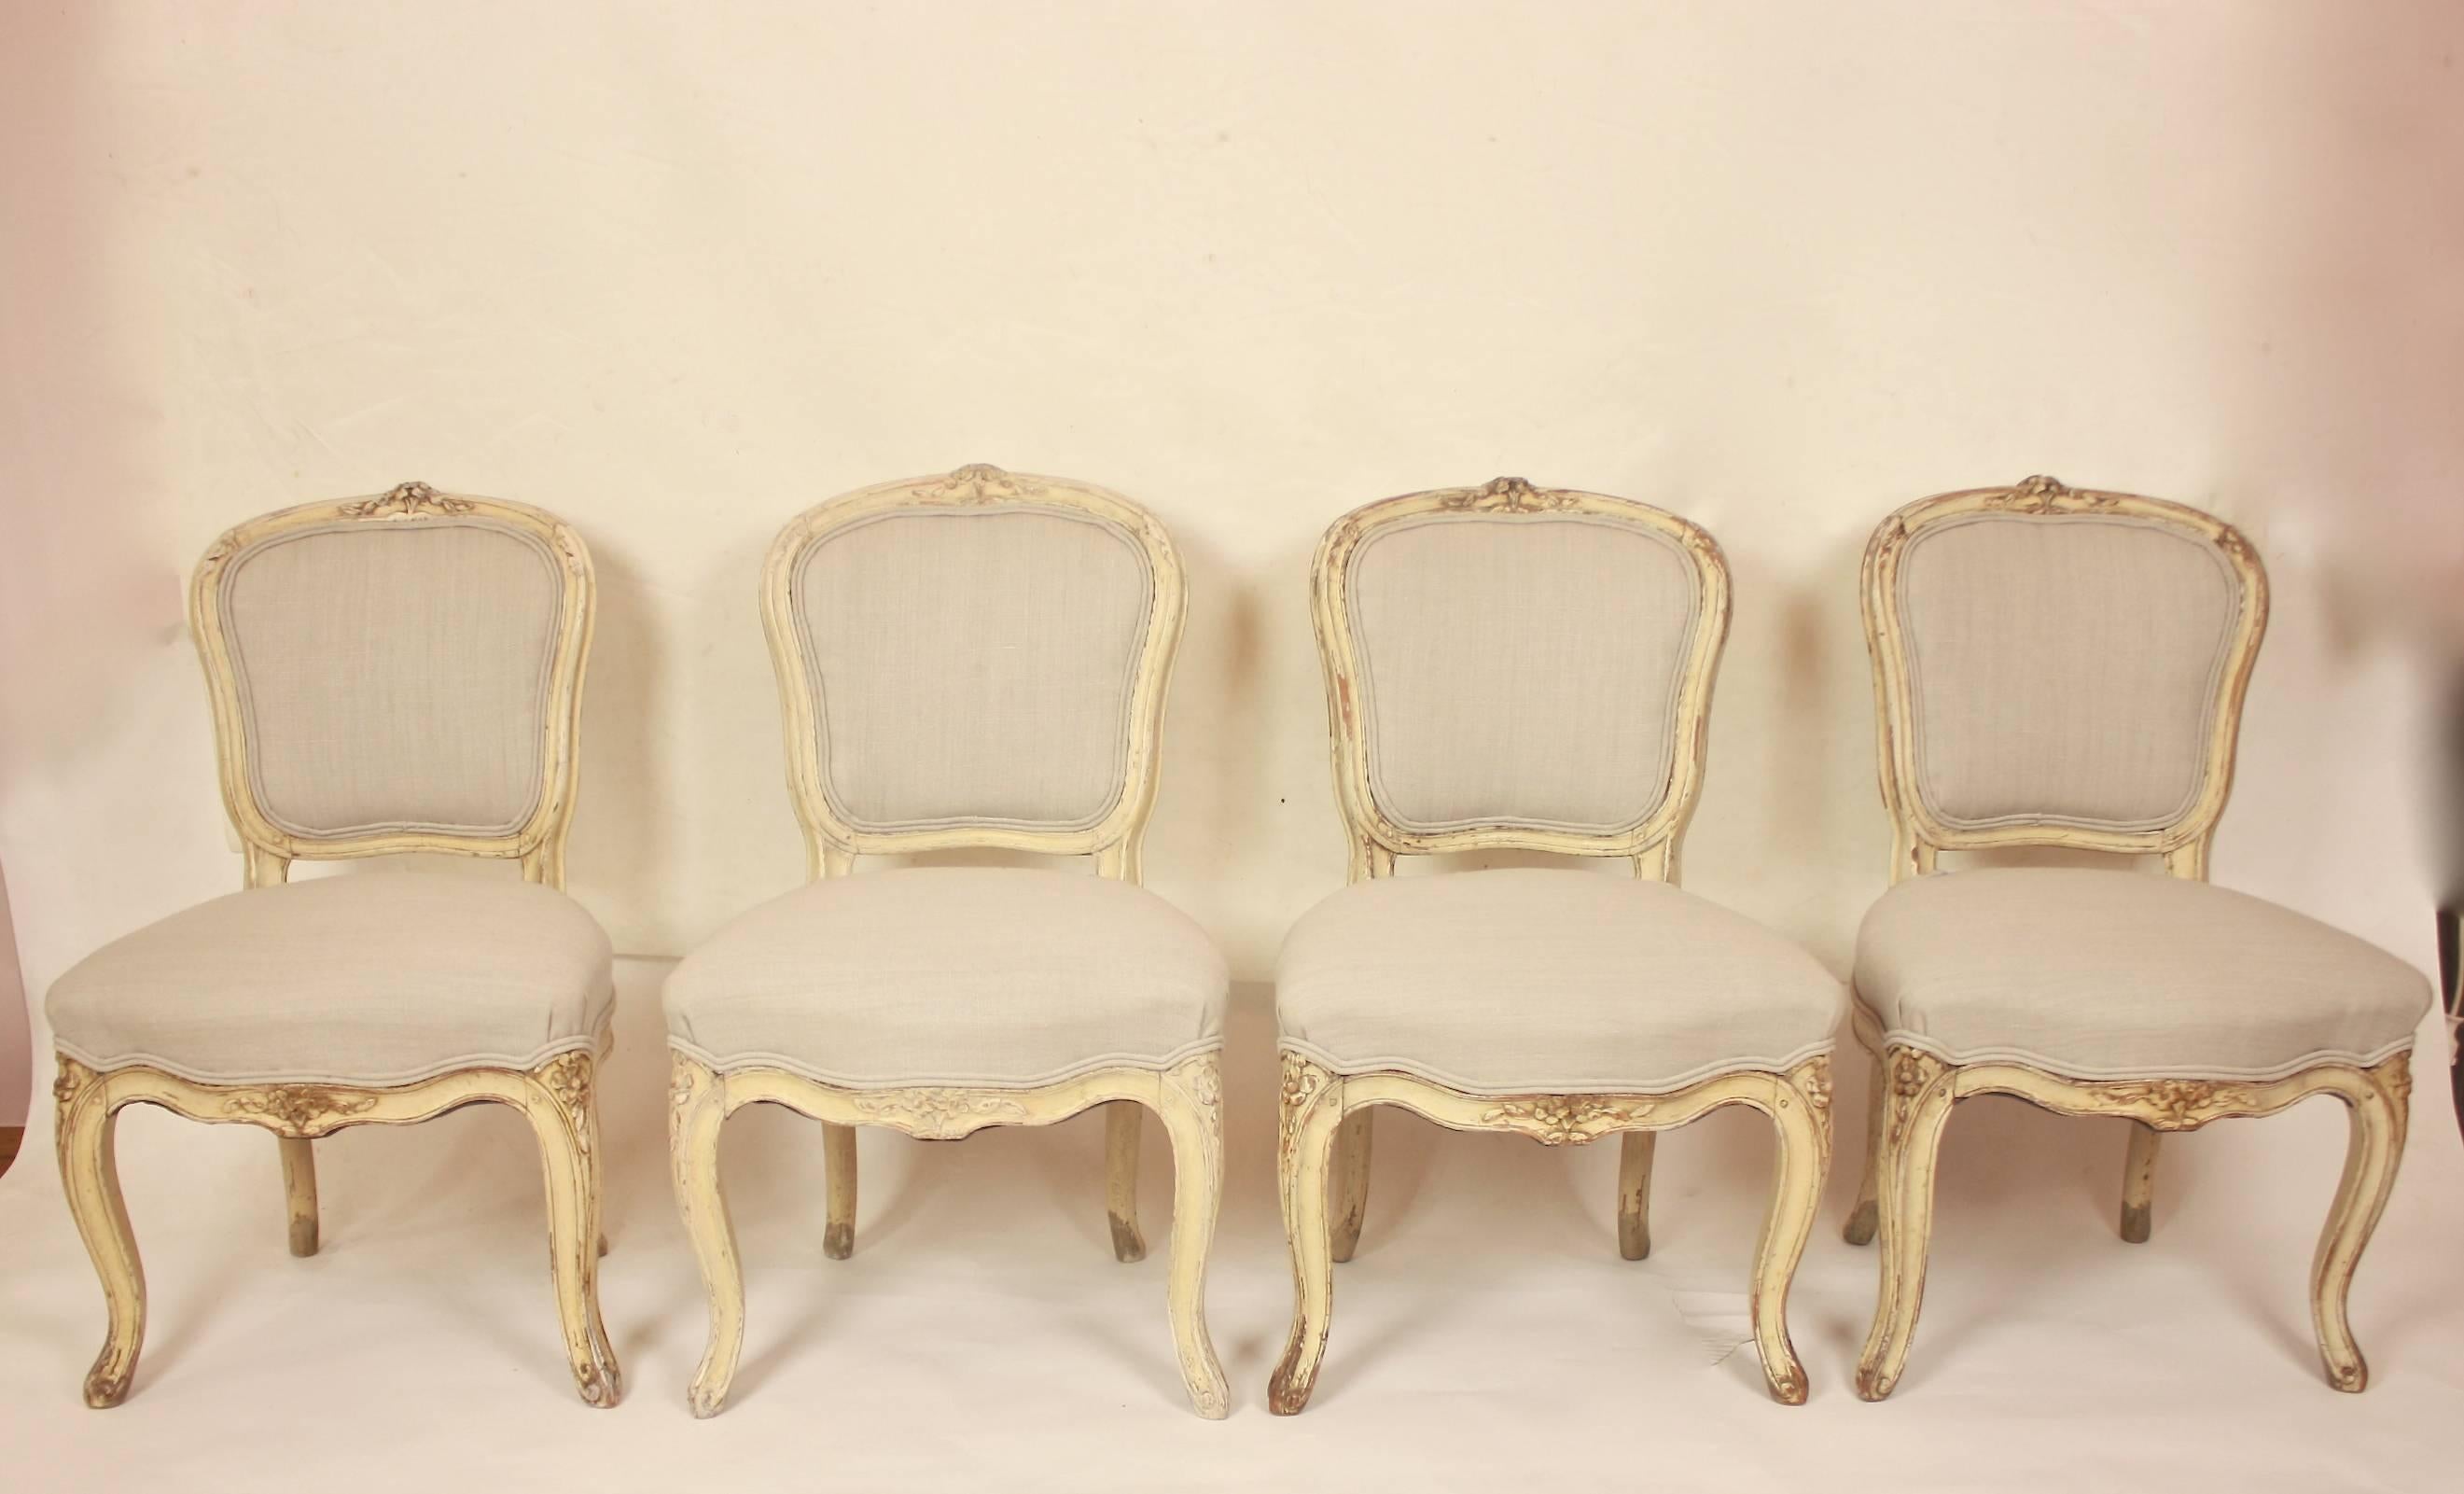 A rare set of eight Louis XV painted and newly upholstered chairs, comprising of four fauteuils and four side chairs. The chairs are painted in a white/ cream colour and covered in silver/ grey linen fabric. Both armchairs and side chairs with a